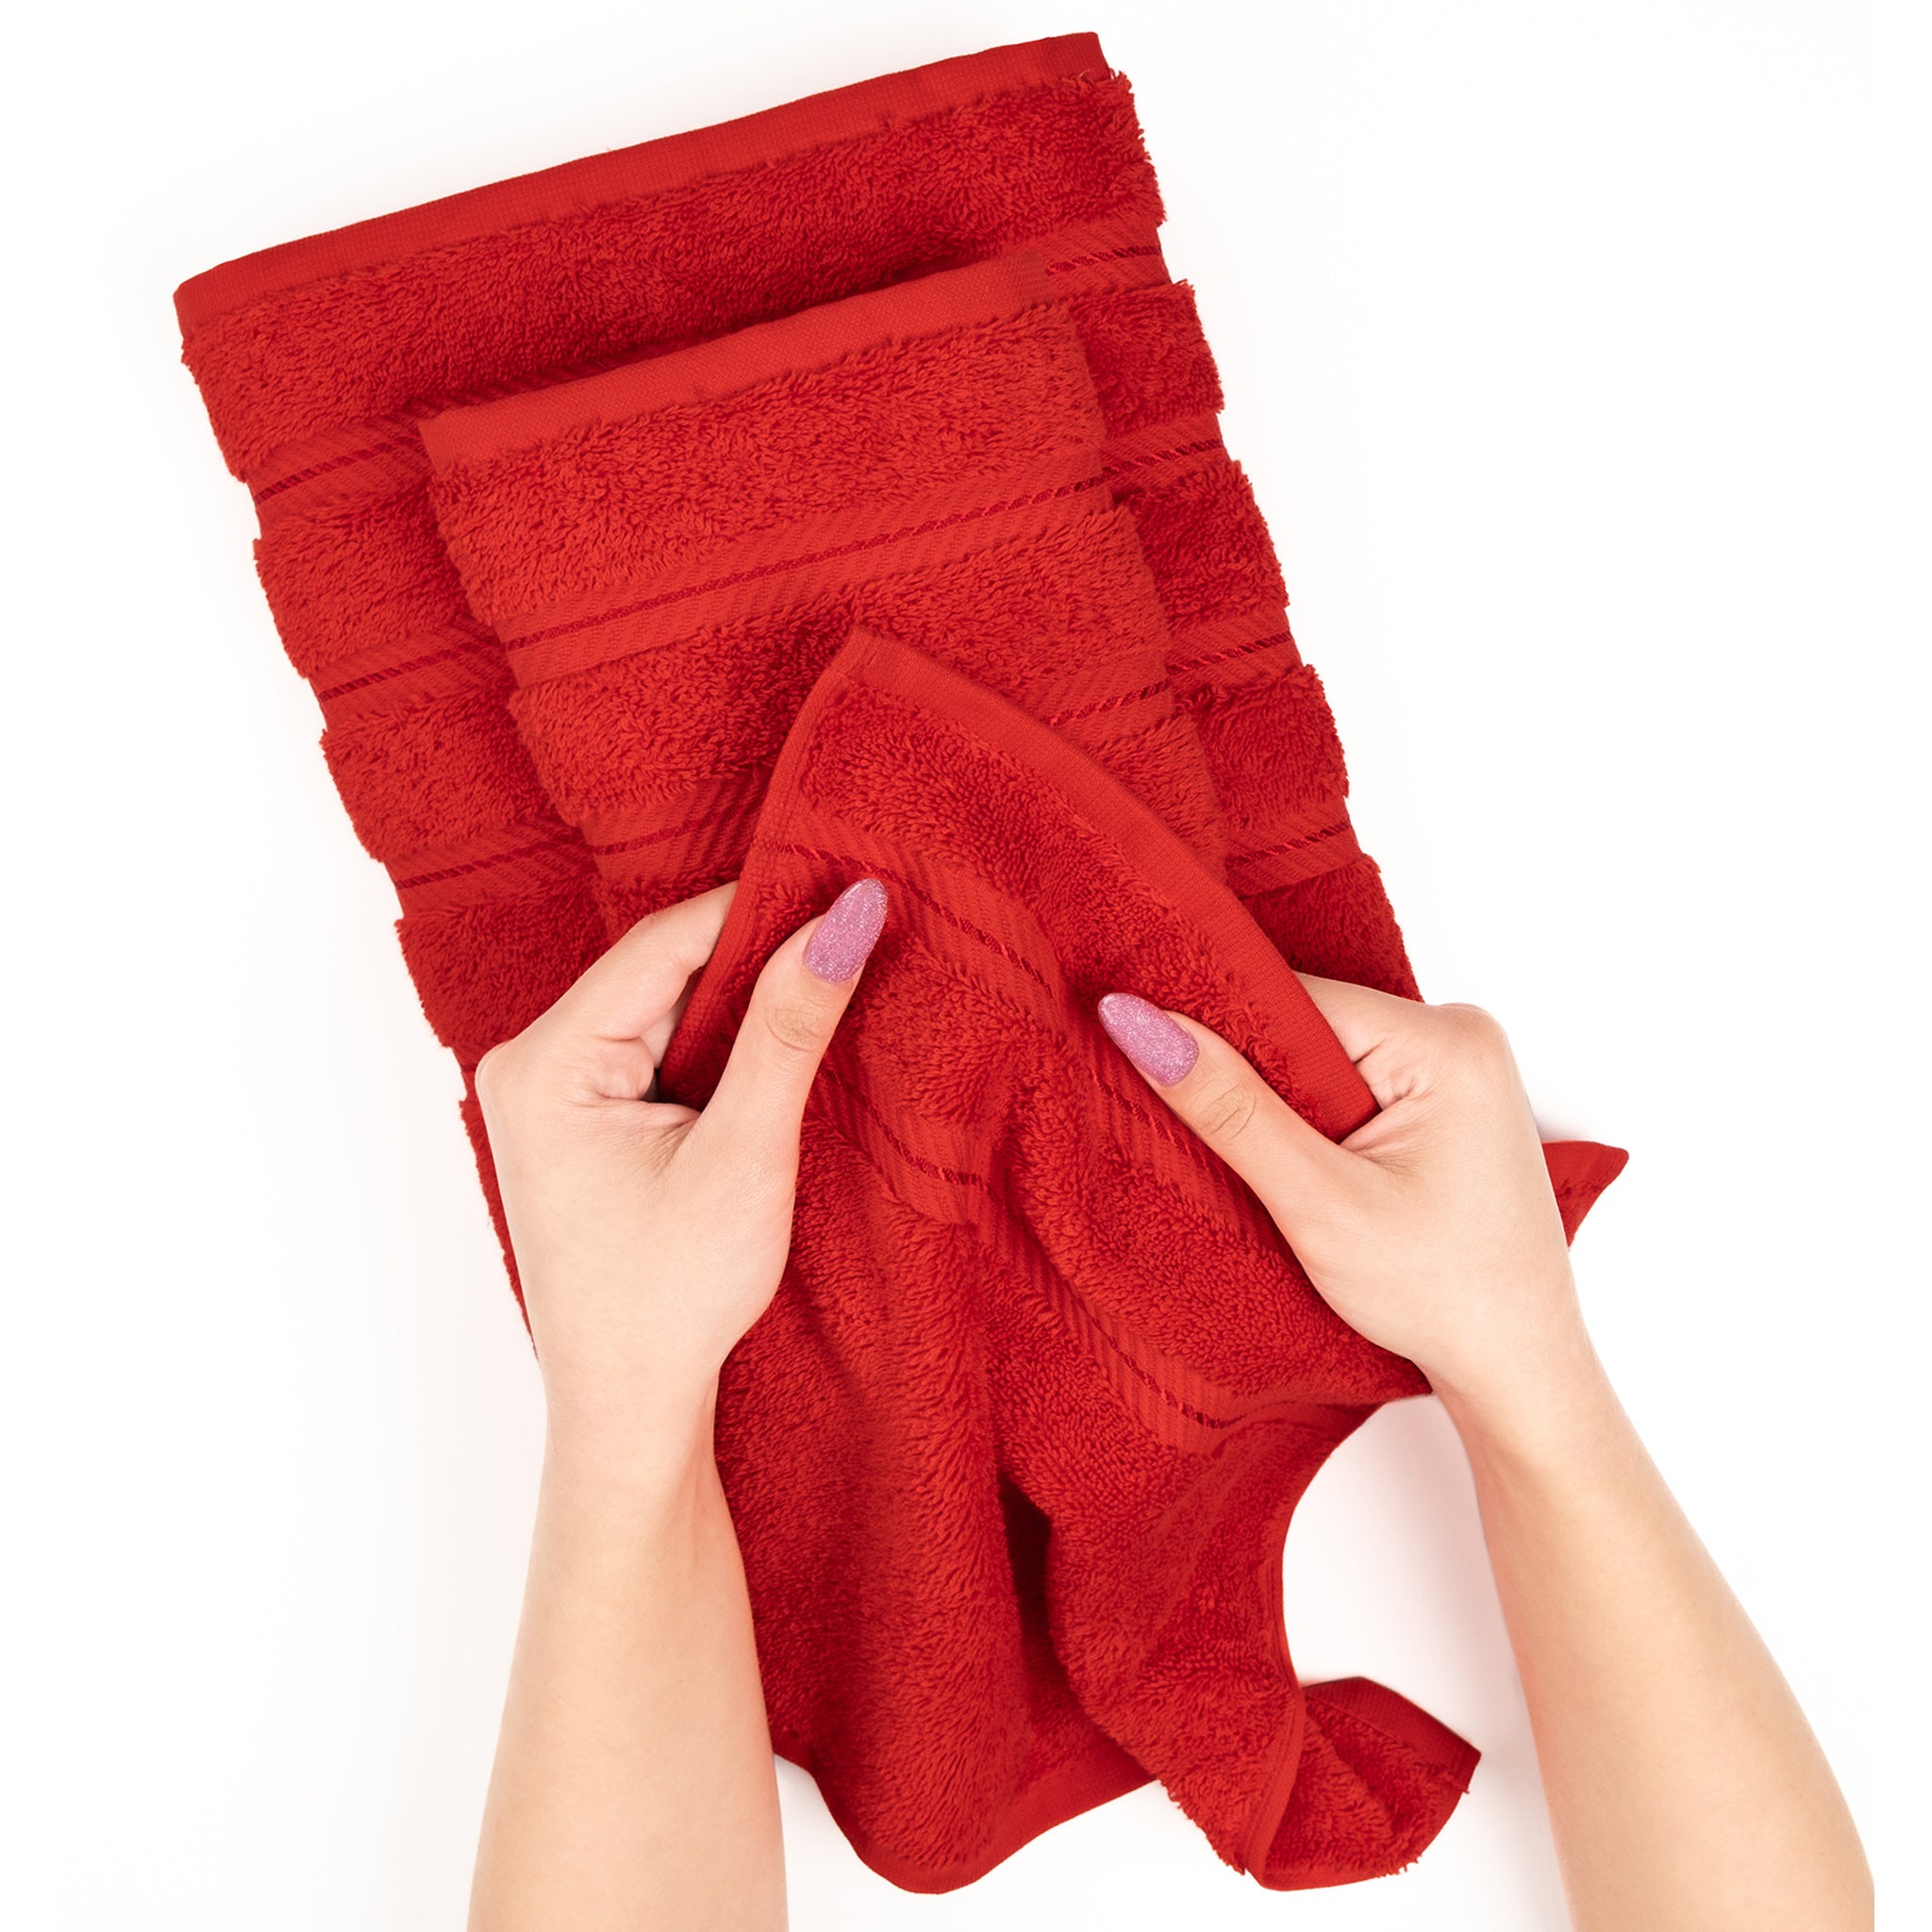 American Soft Linen 100% Turkish Cotton 4 Pack Hand Towel Set red-5